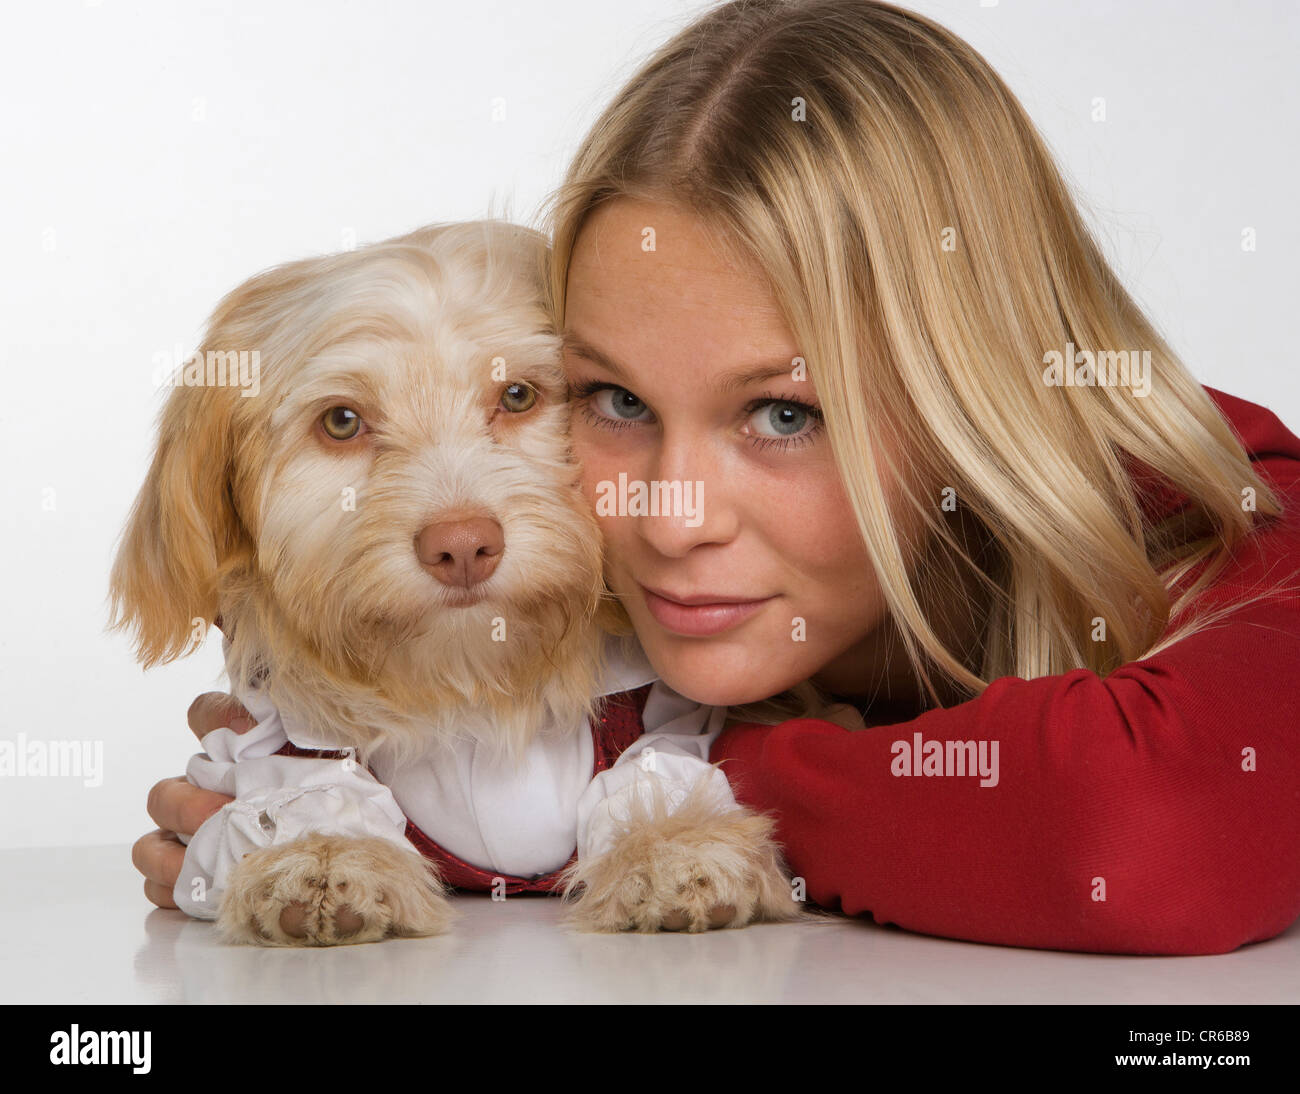 Young woman with dog, portrait Stock Photo